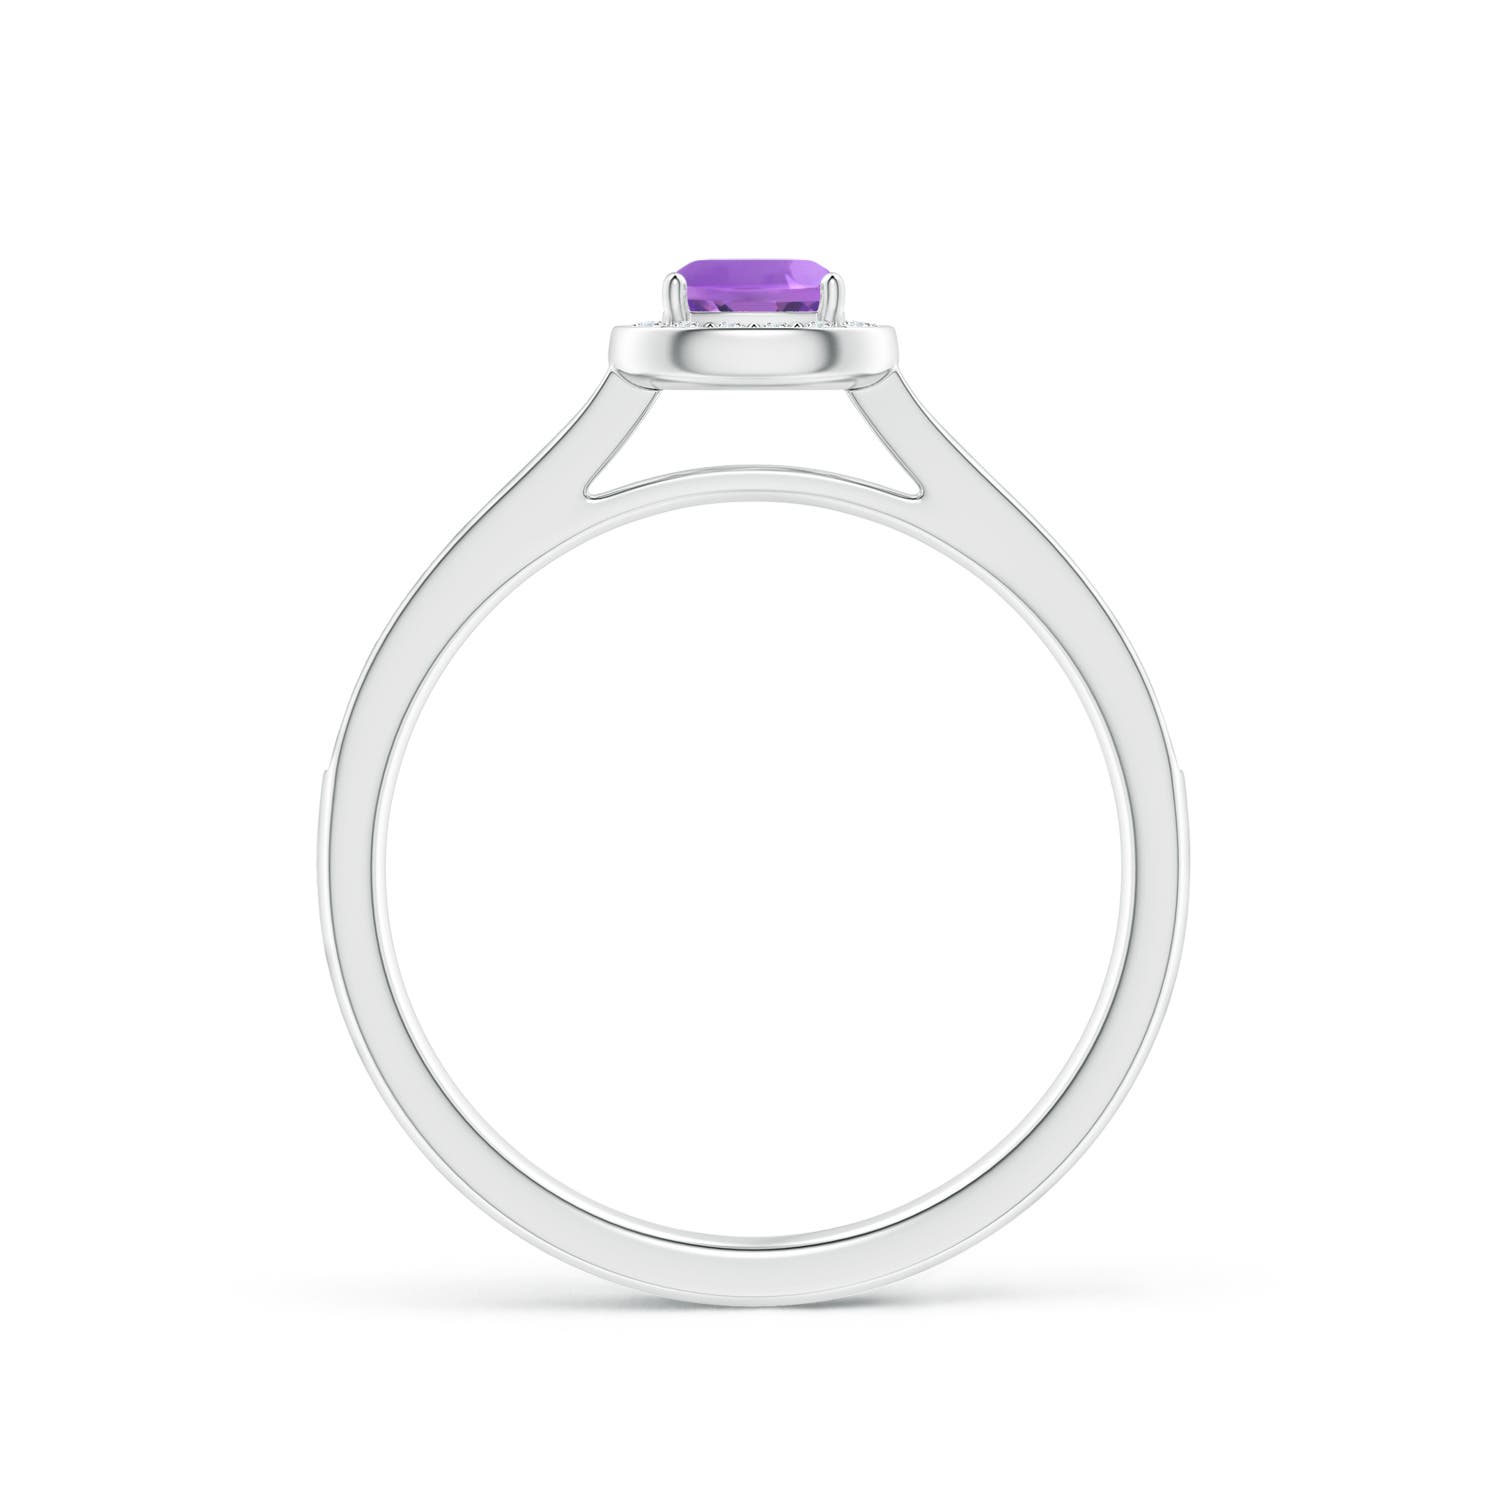 AA - Amethyst / 0.49 CT / 14 KT White Gold